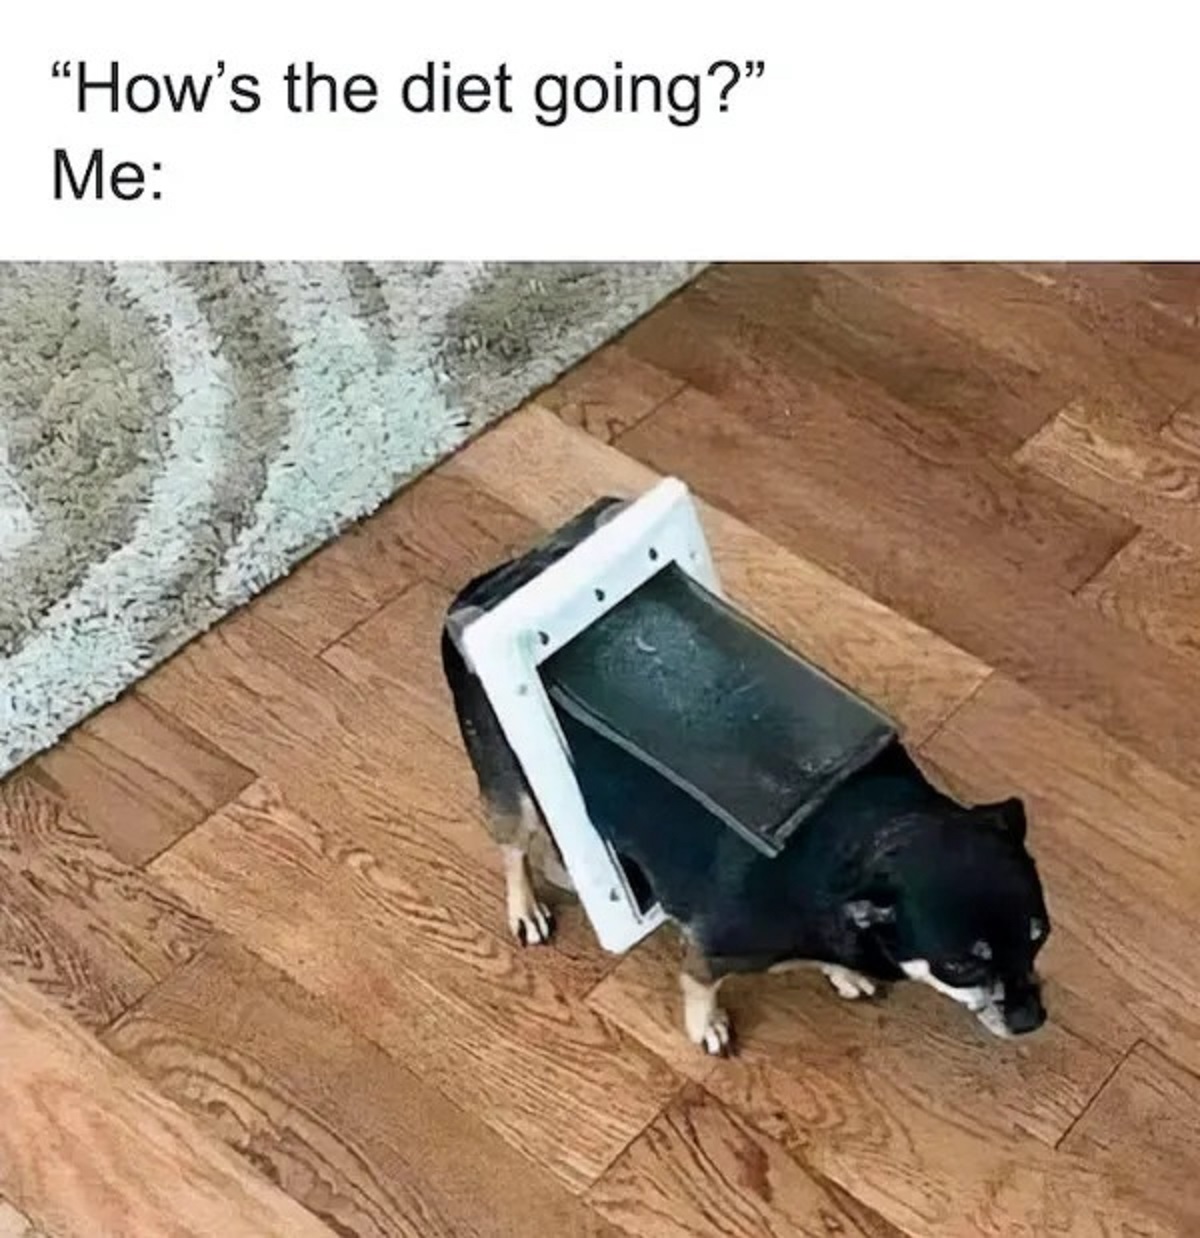 photo caption - "How's the diet going?" Me